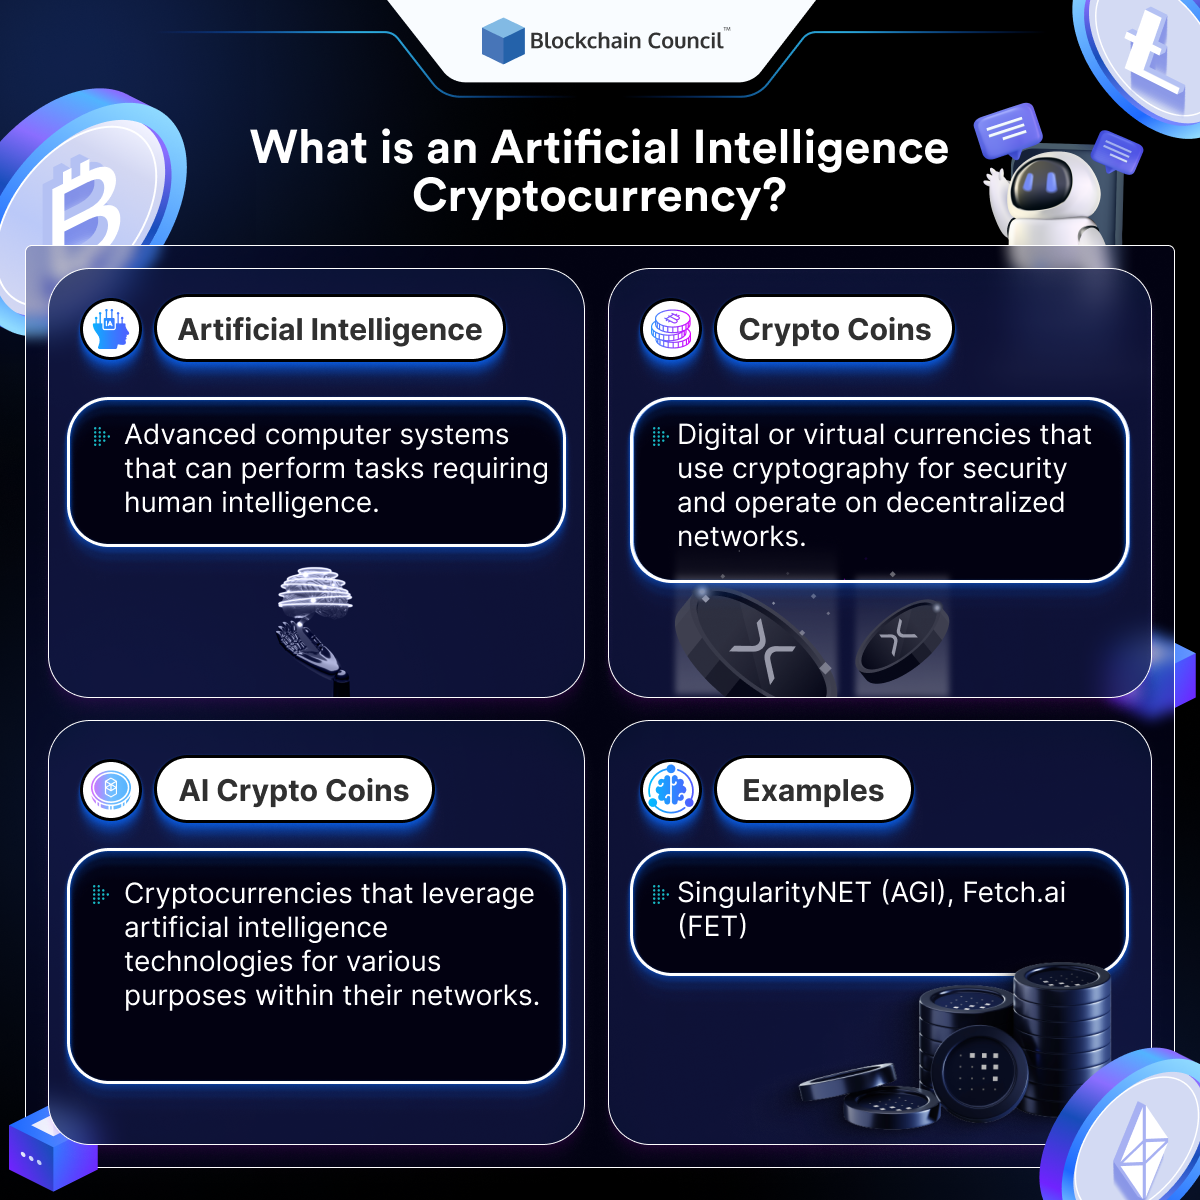 What is an Artificial Intelligence Cryptocurrency?